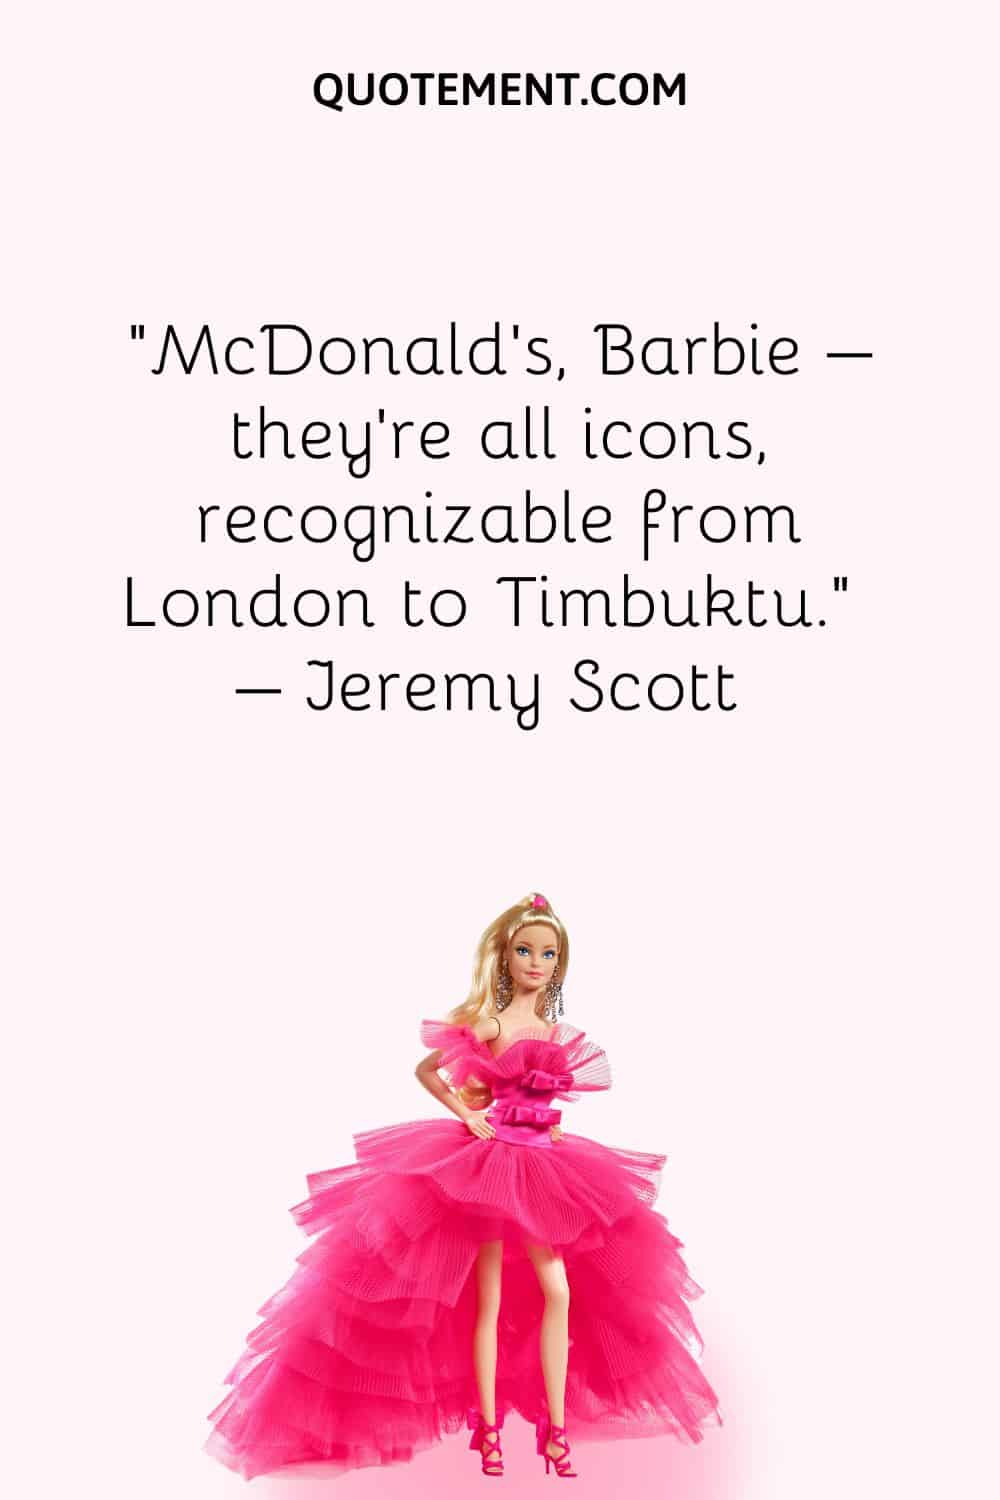 McDonald's, Barbie – they're all icons, recognizable from London to Timbuktu.